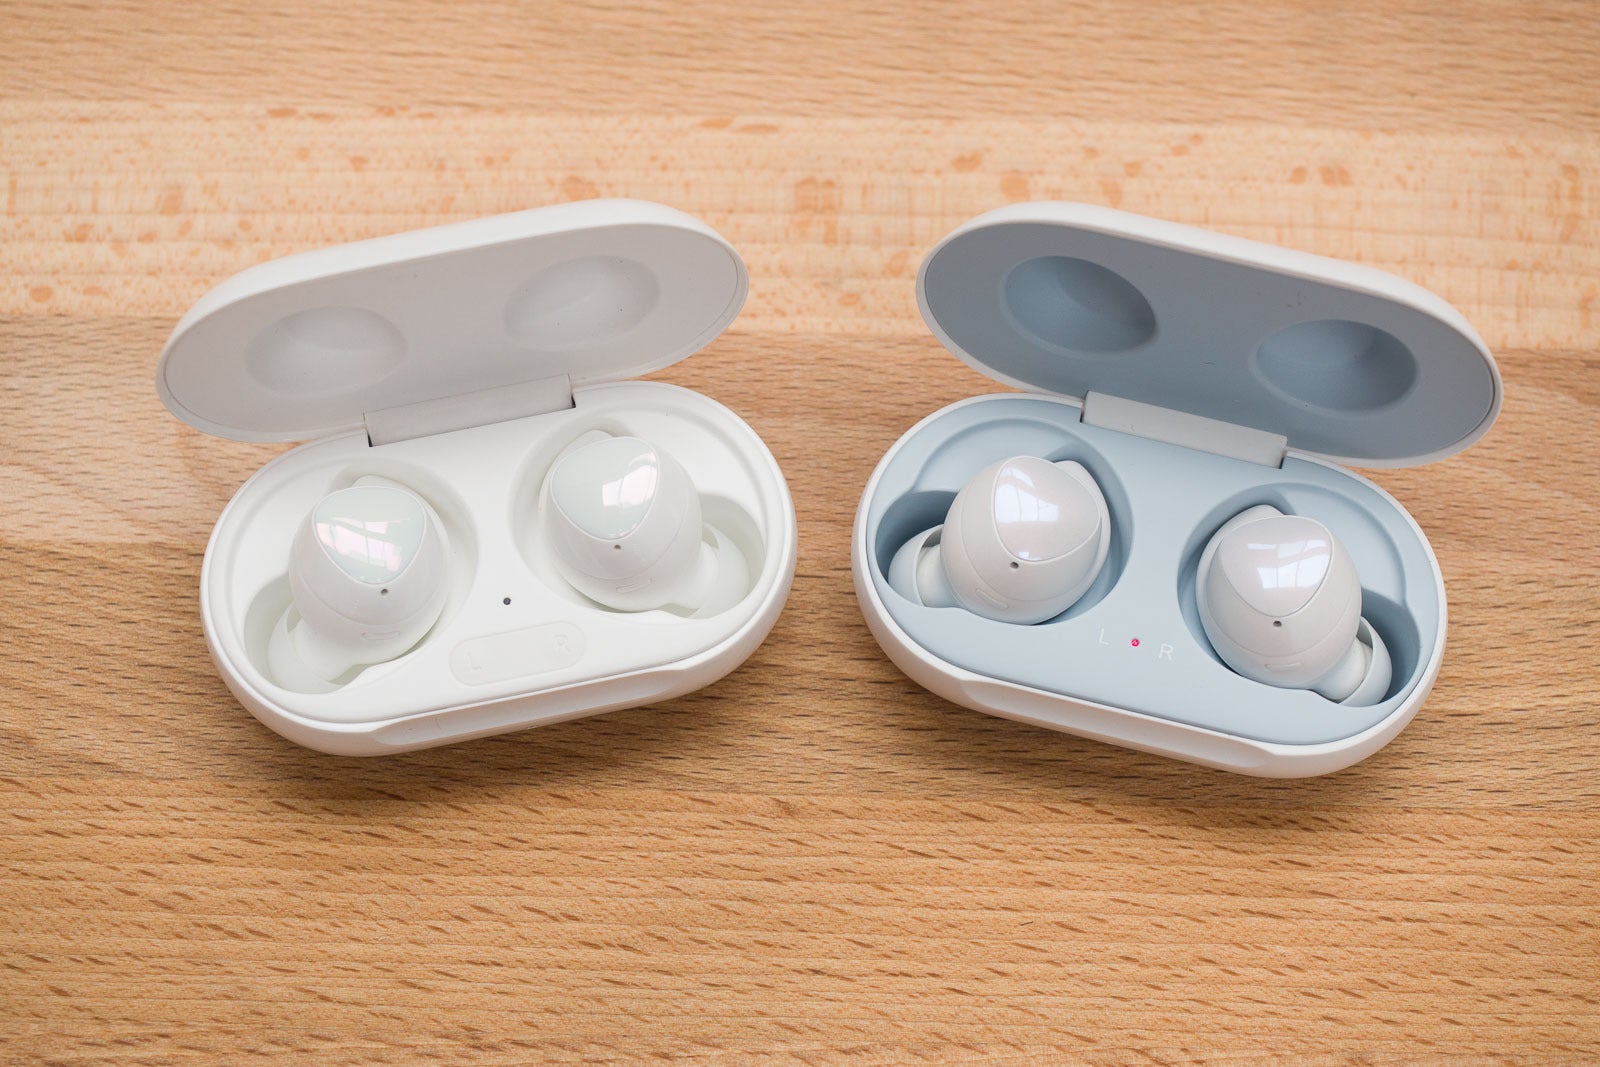 Samsung Galaxy Buds Plus - Image credit - PhoneArena - The Best Galaxy Buds you can buy - five hand-picked models